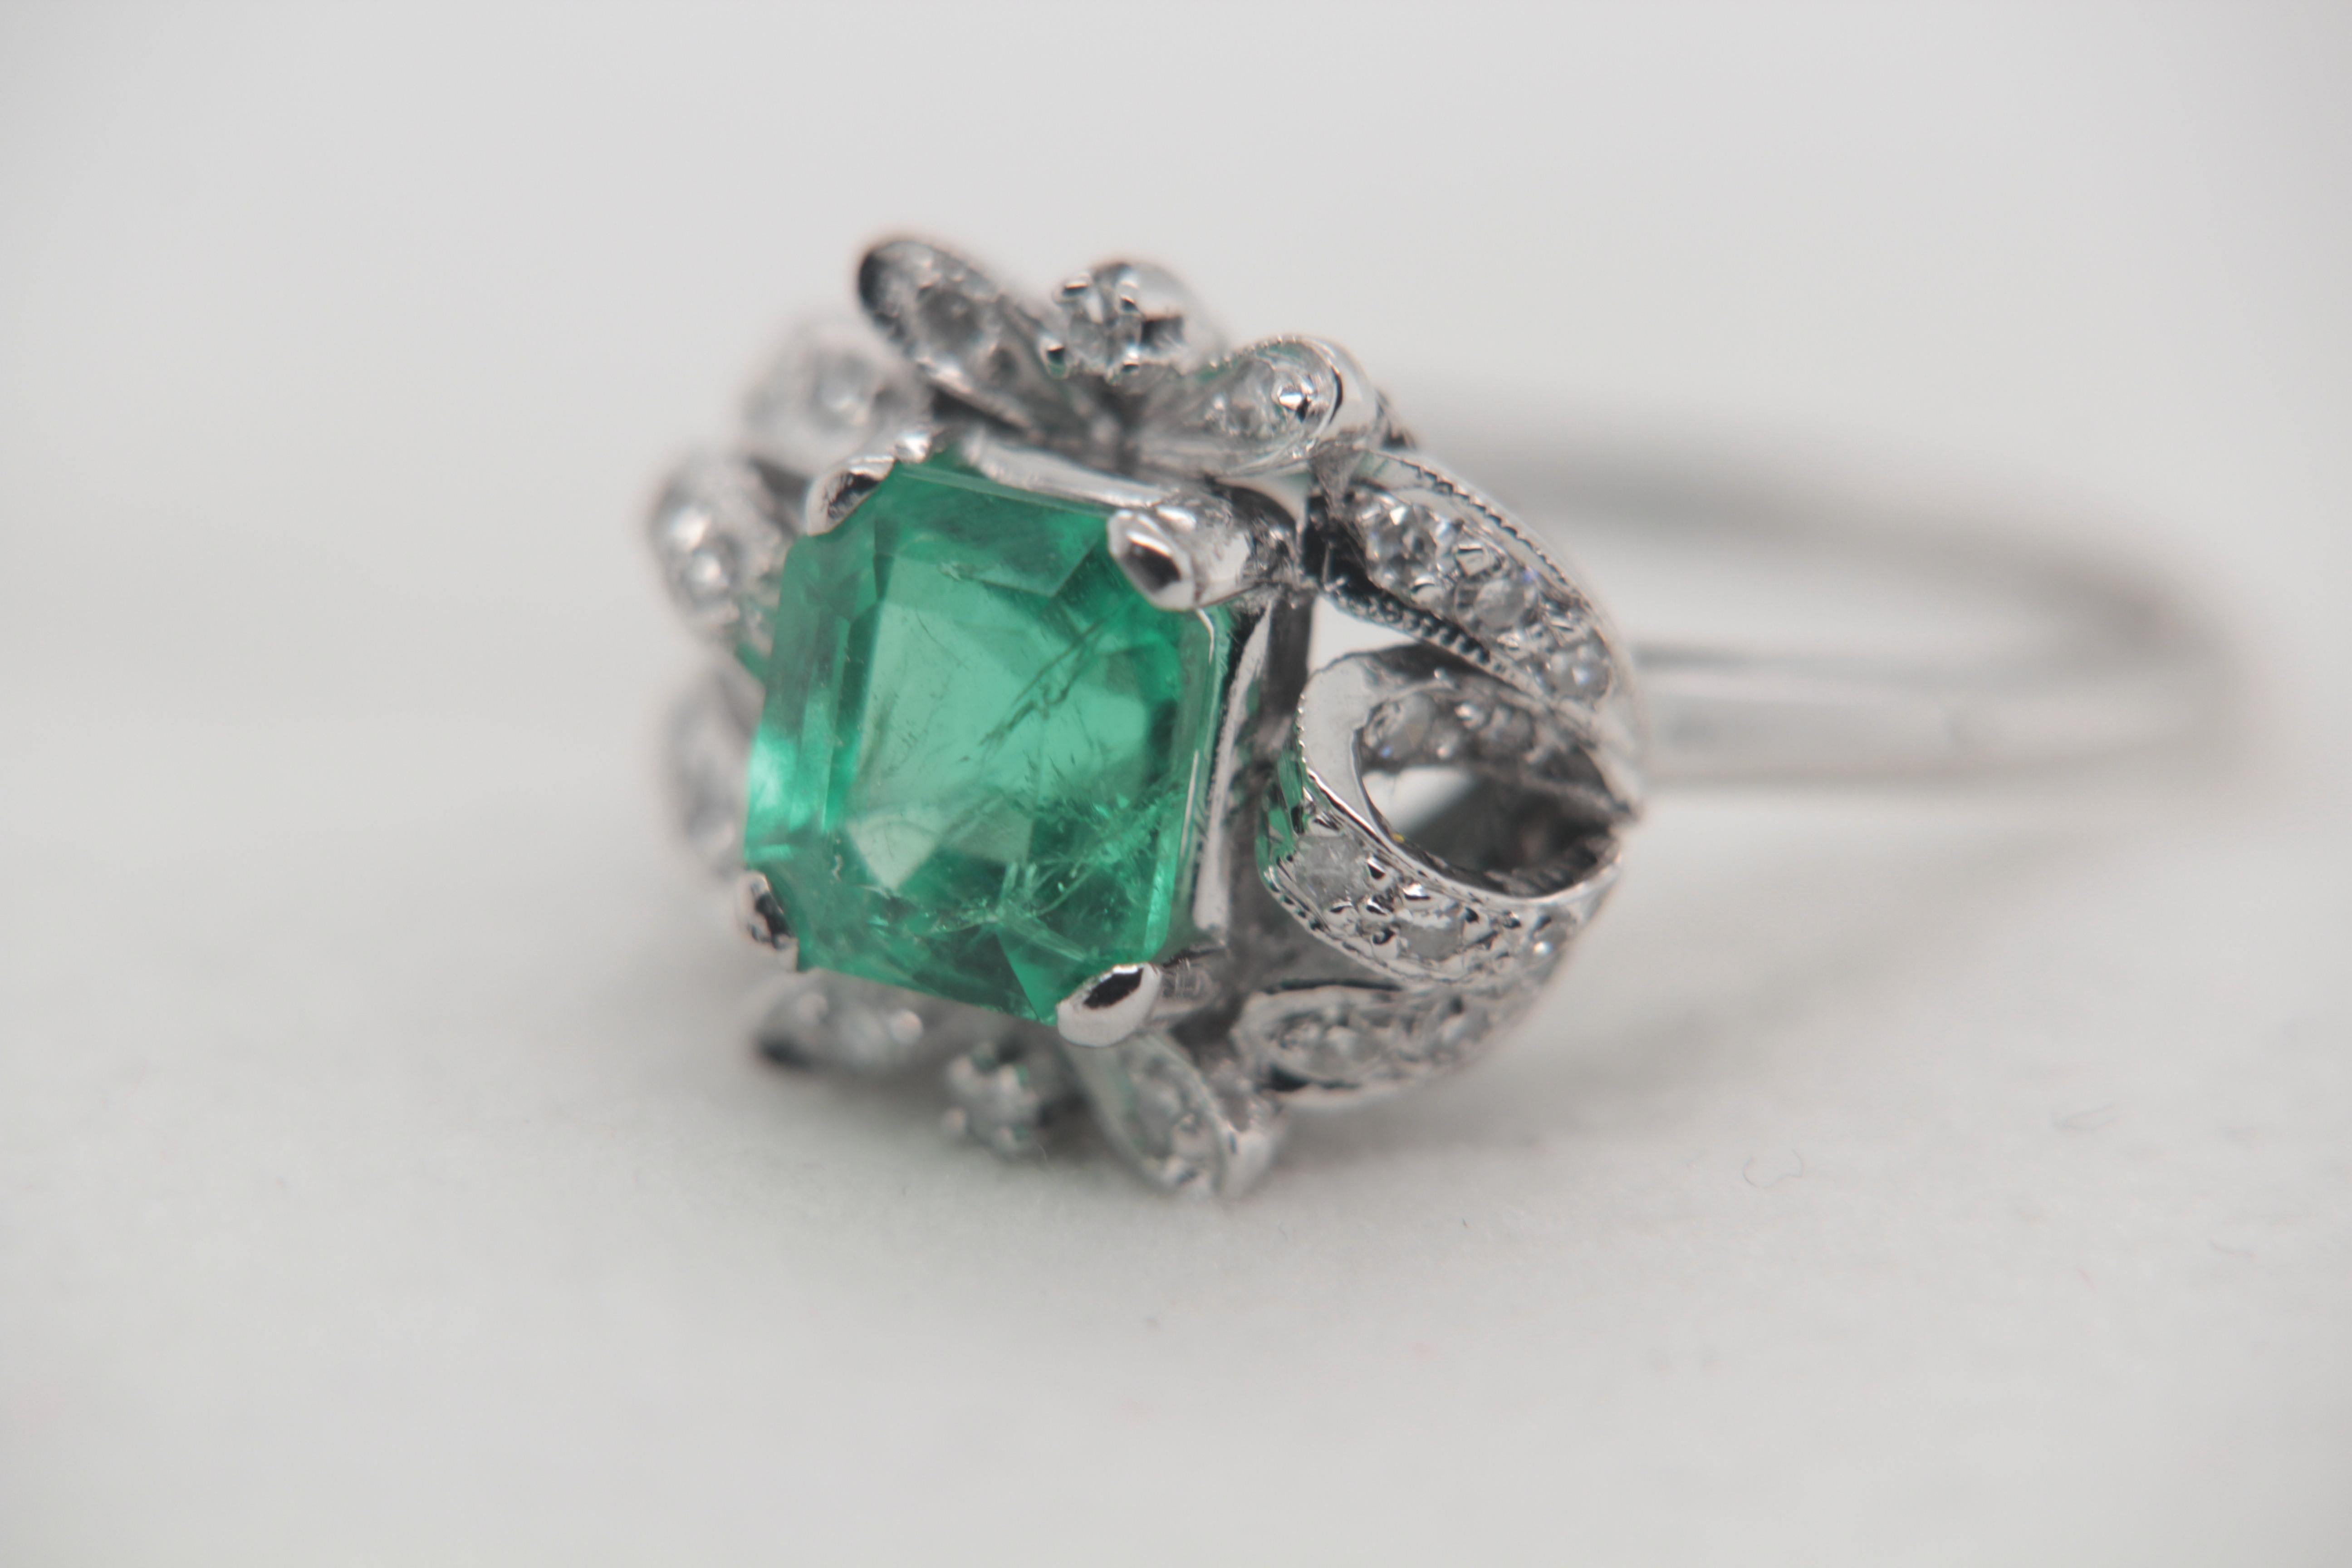 Square Cut 1.91 Carat Colombian Emerald and Diamond Ring in 18 Karat Gold